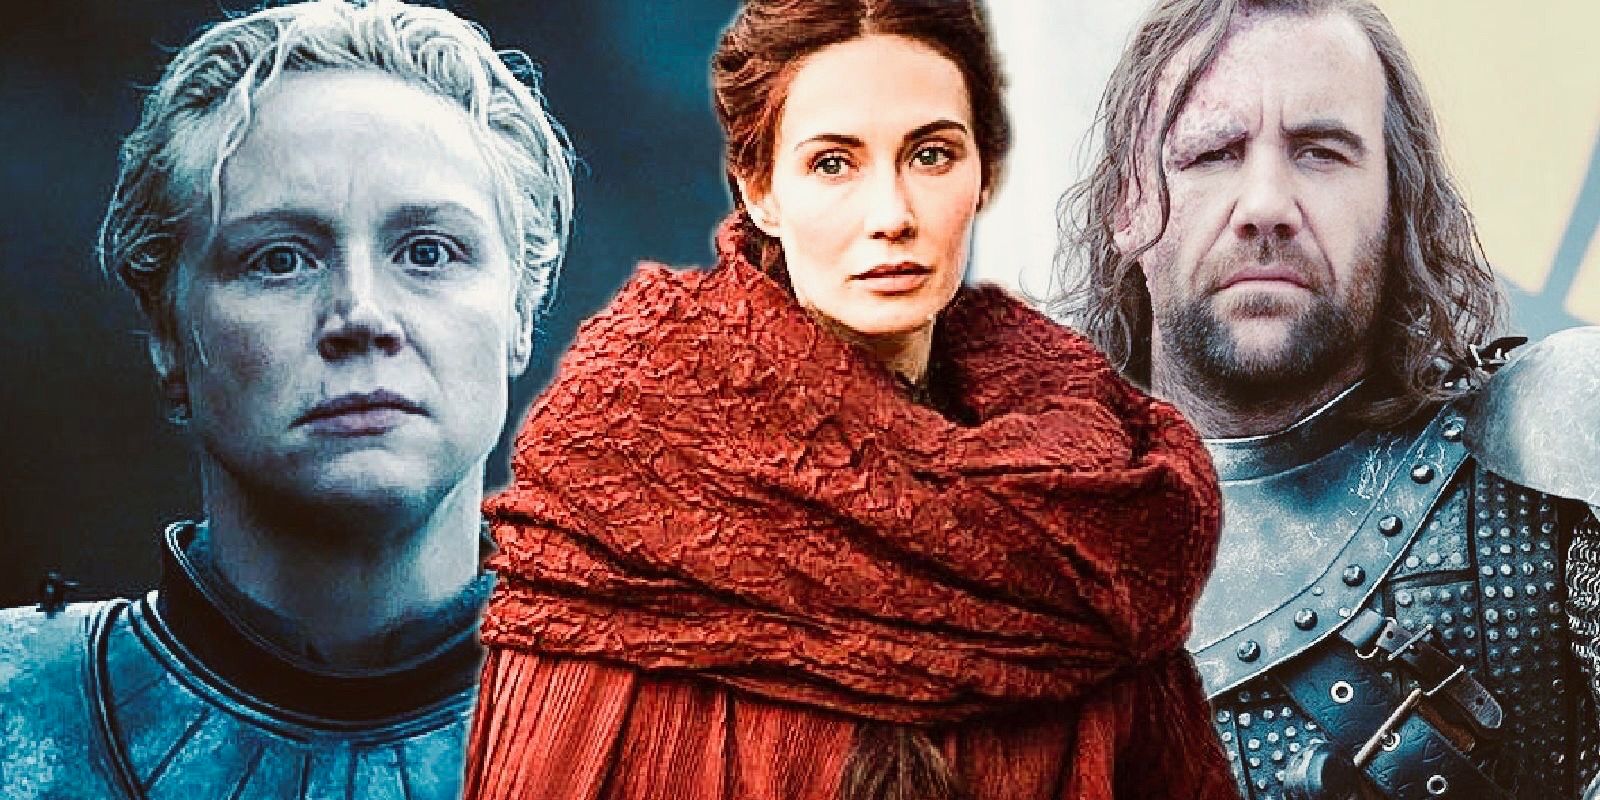 Brienne, Melisandre and The Hound in Game of Thrones